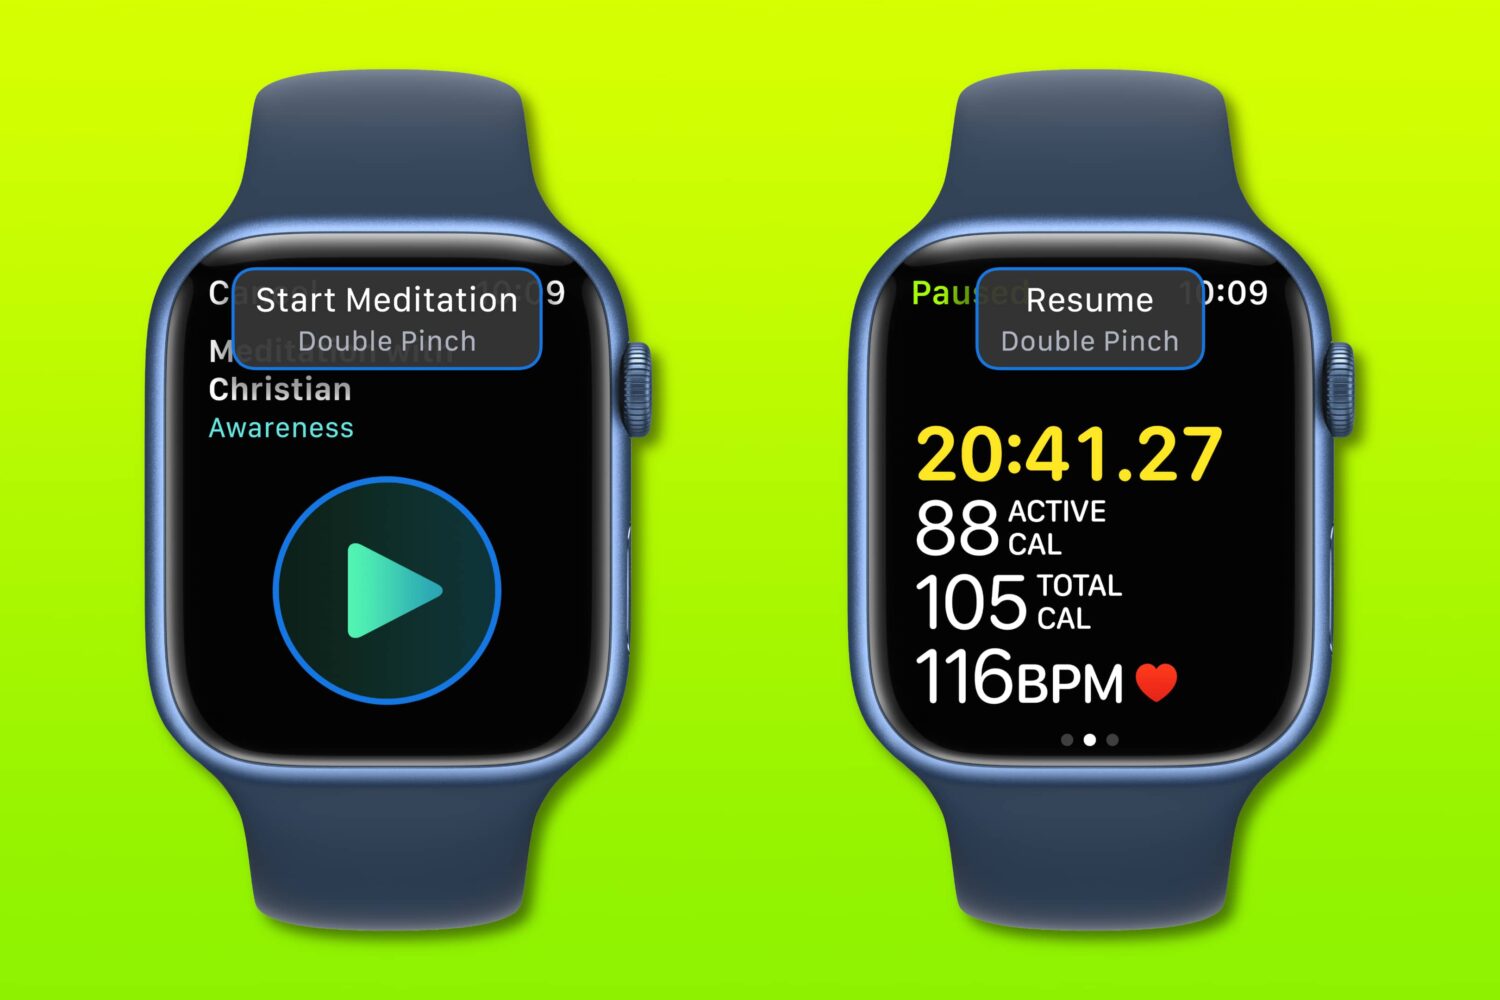 Two Apple Watch device screenshots showcasing the new AssistiveTouch gestures coming with watchOS 9, including pinching twice to start, pause or resume a workout in the Workout app or a breathe session in the Mindfulness app